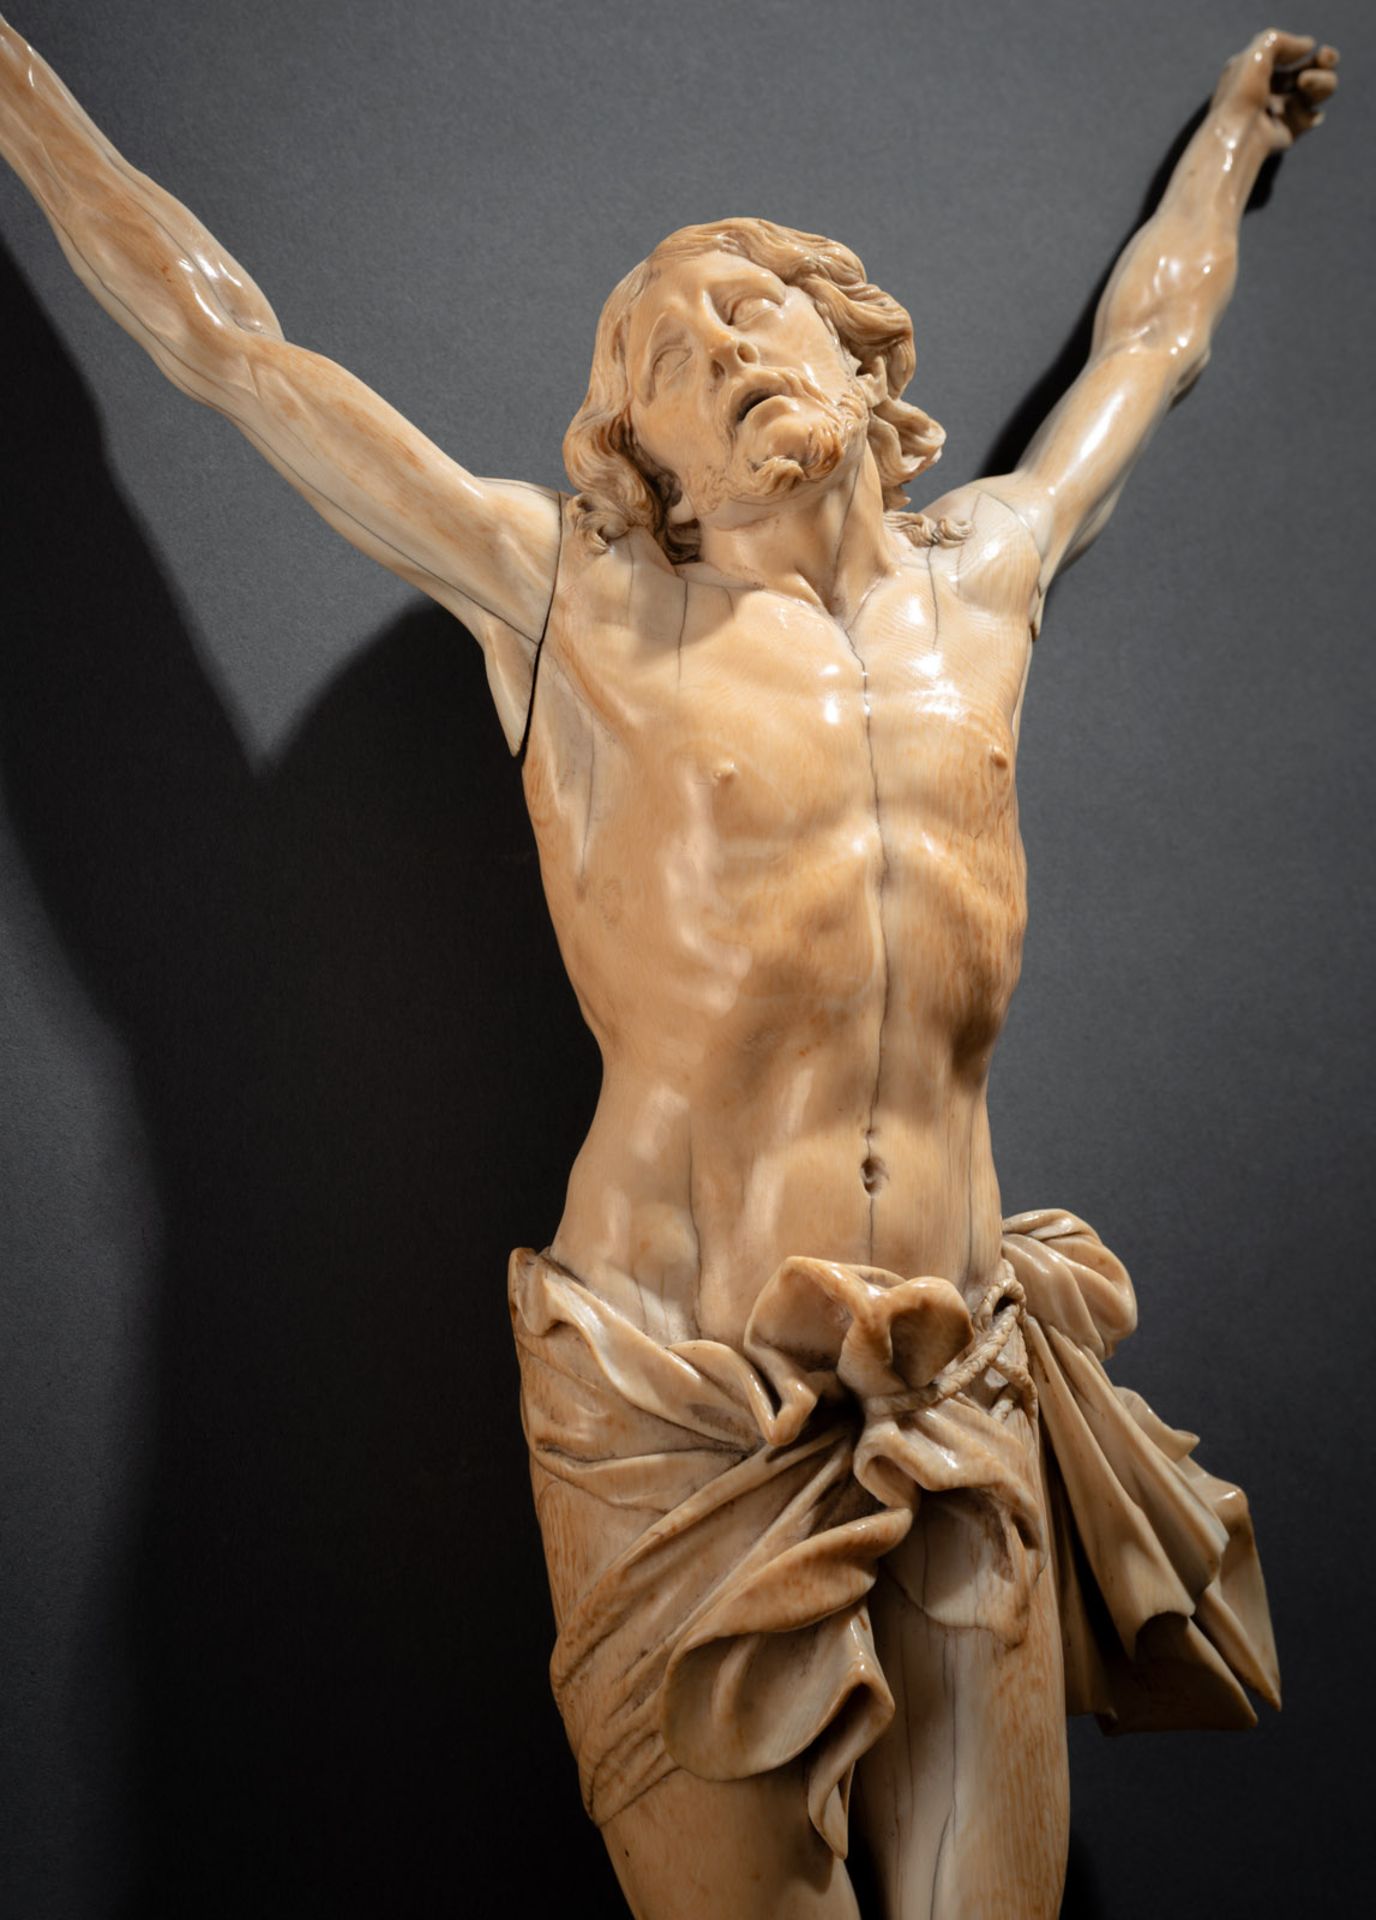 A LARGE AN EXPRESSIVE BAROQUE IVORY BODY OF CHRIST - Image 2 of 3